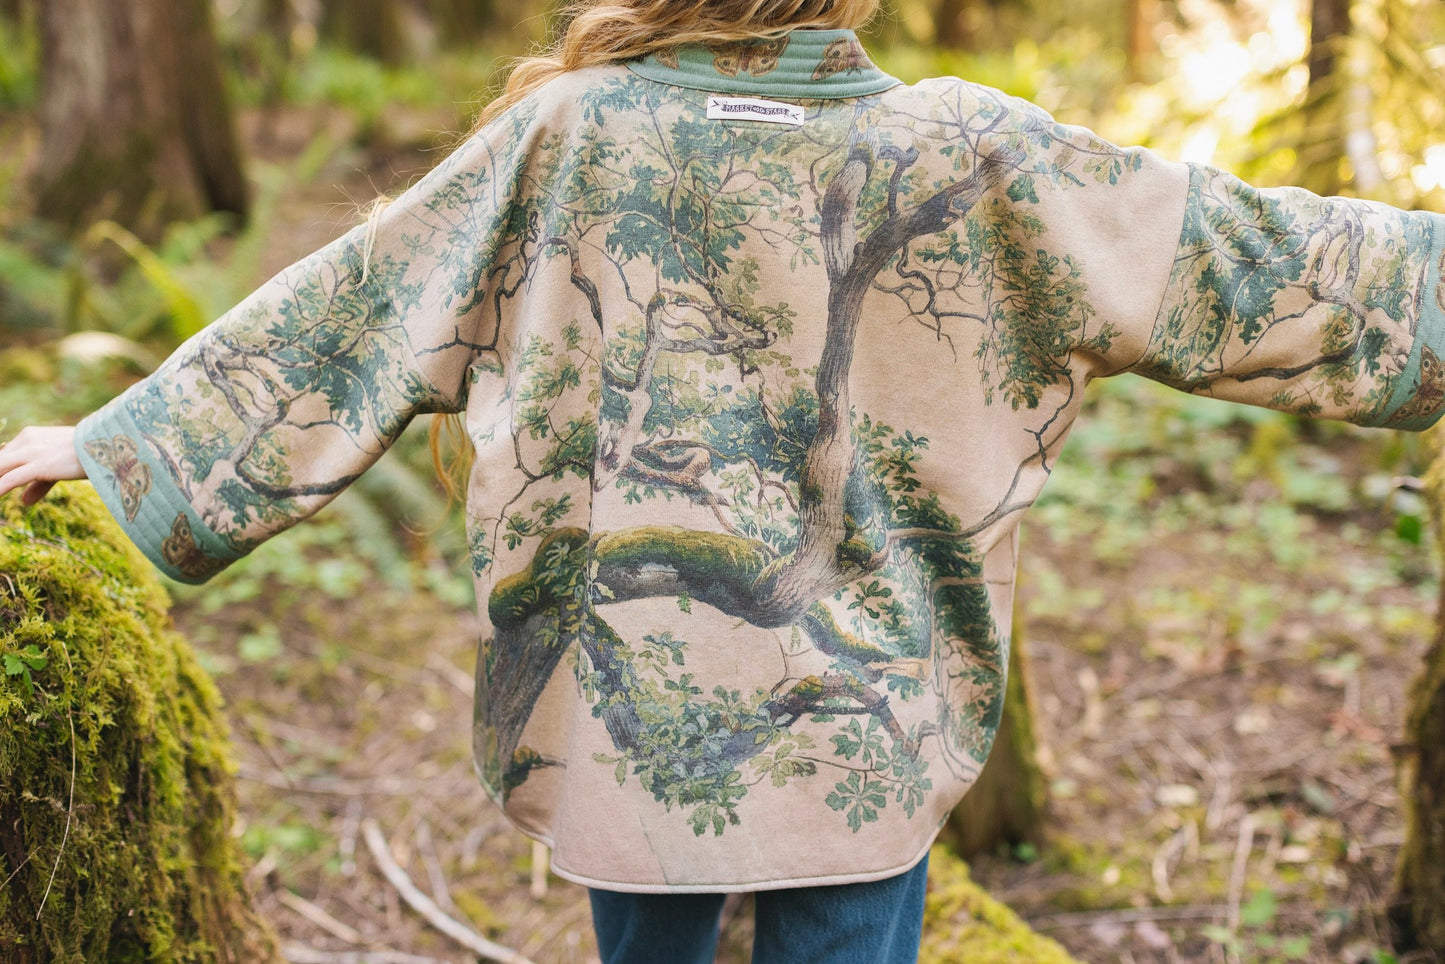 Earth & Sky Cottage Jacket by Market of Stars